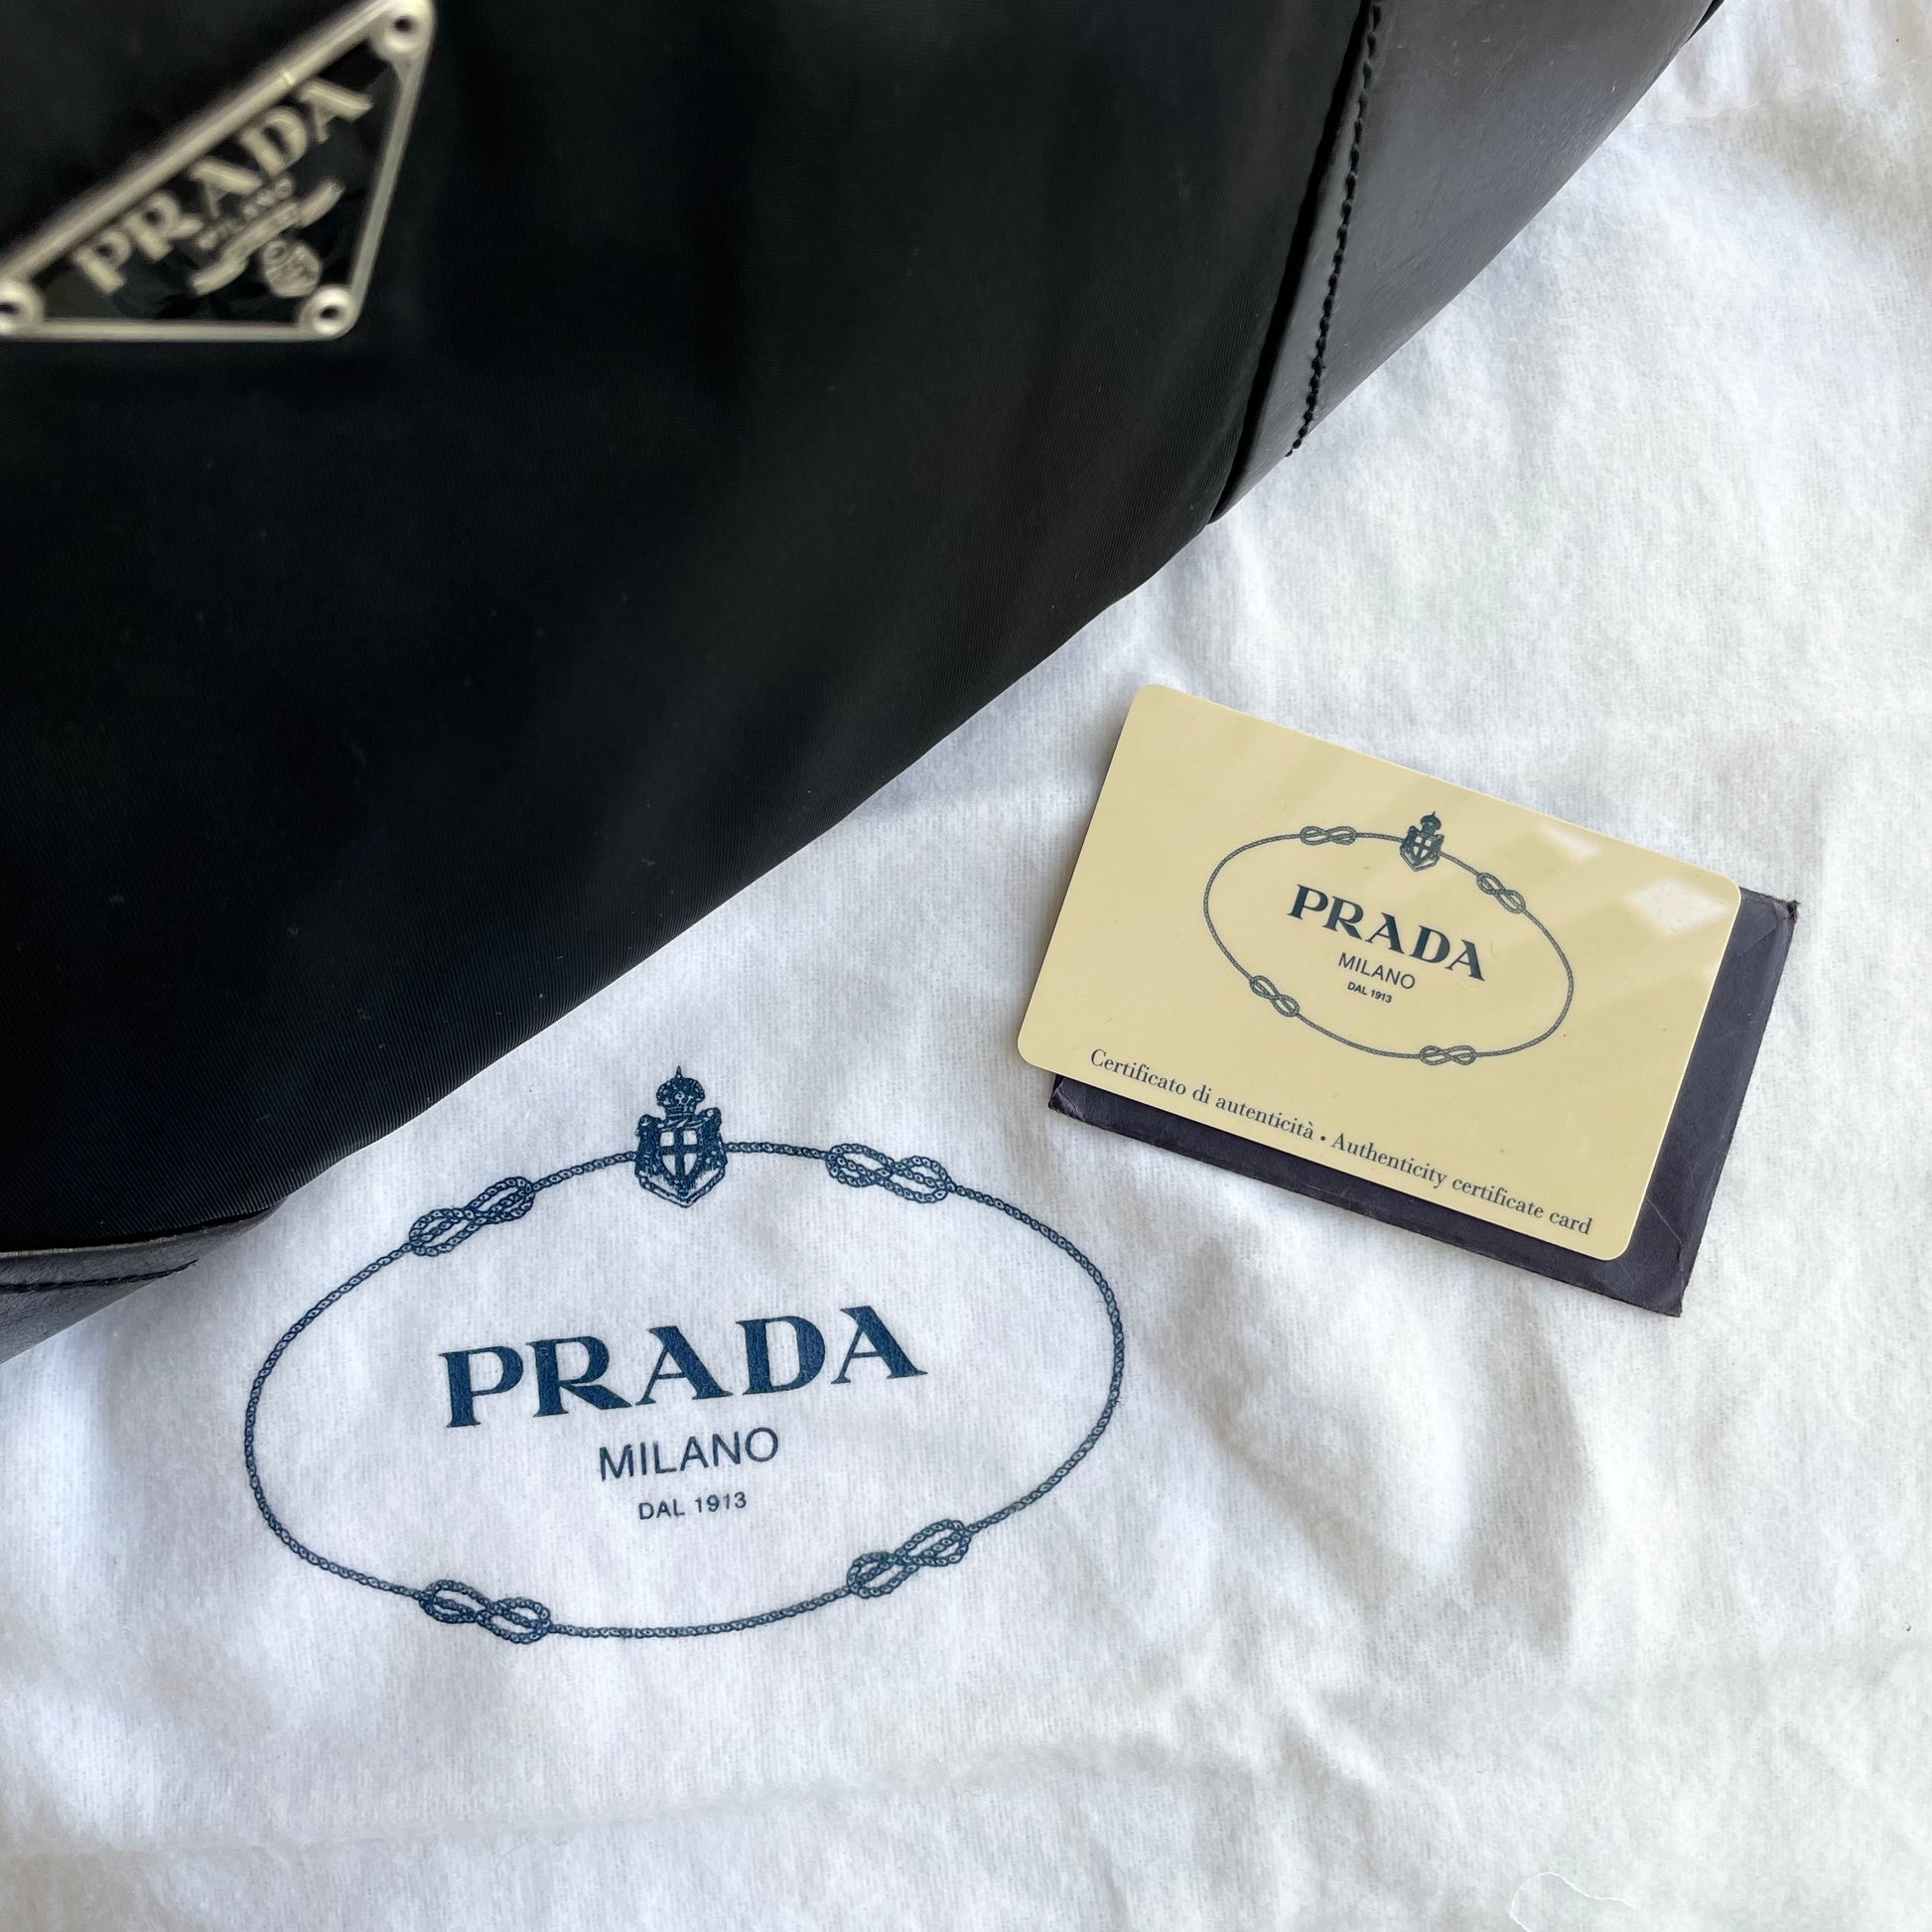 Authentic Prada Nylon Tote Bag With Authenticity Card for Sale in